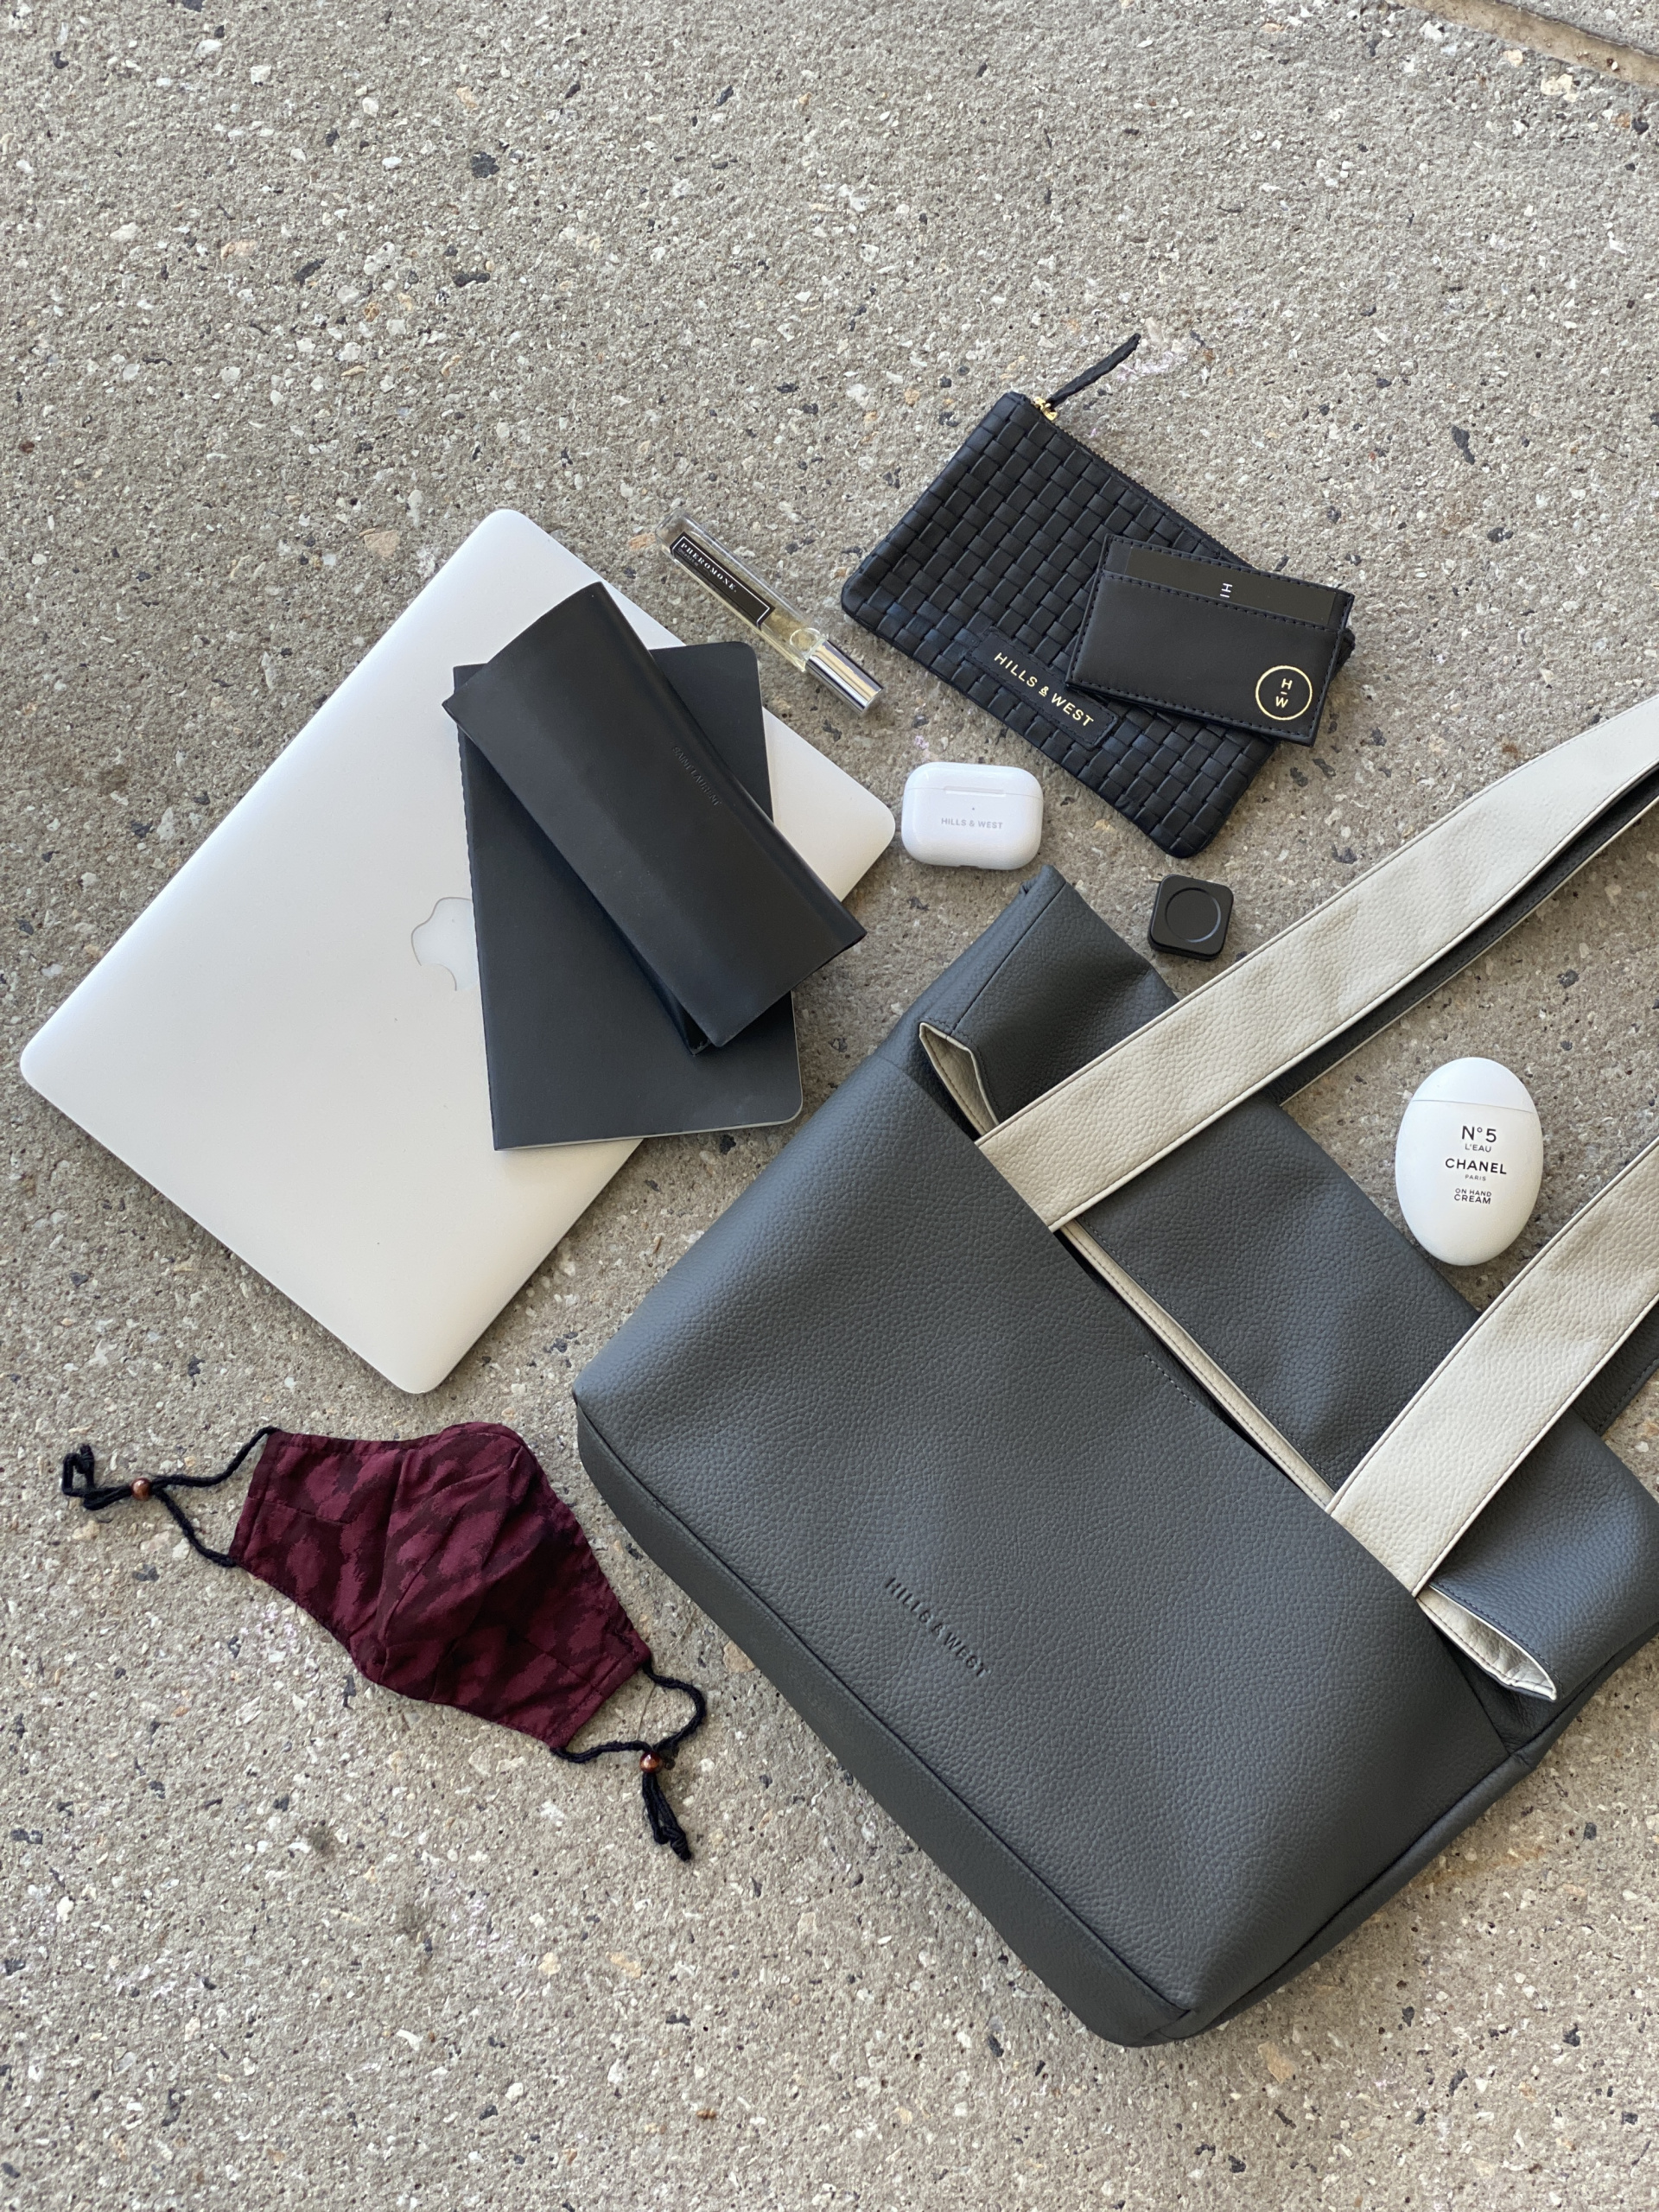 Can you claim a tax deduction for your work bag?